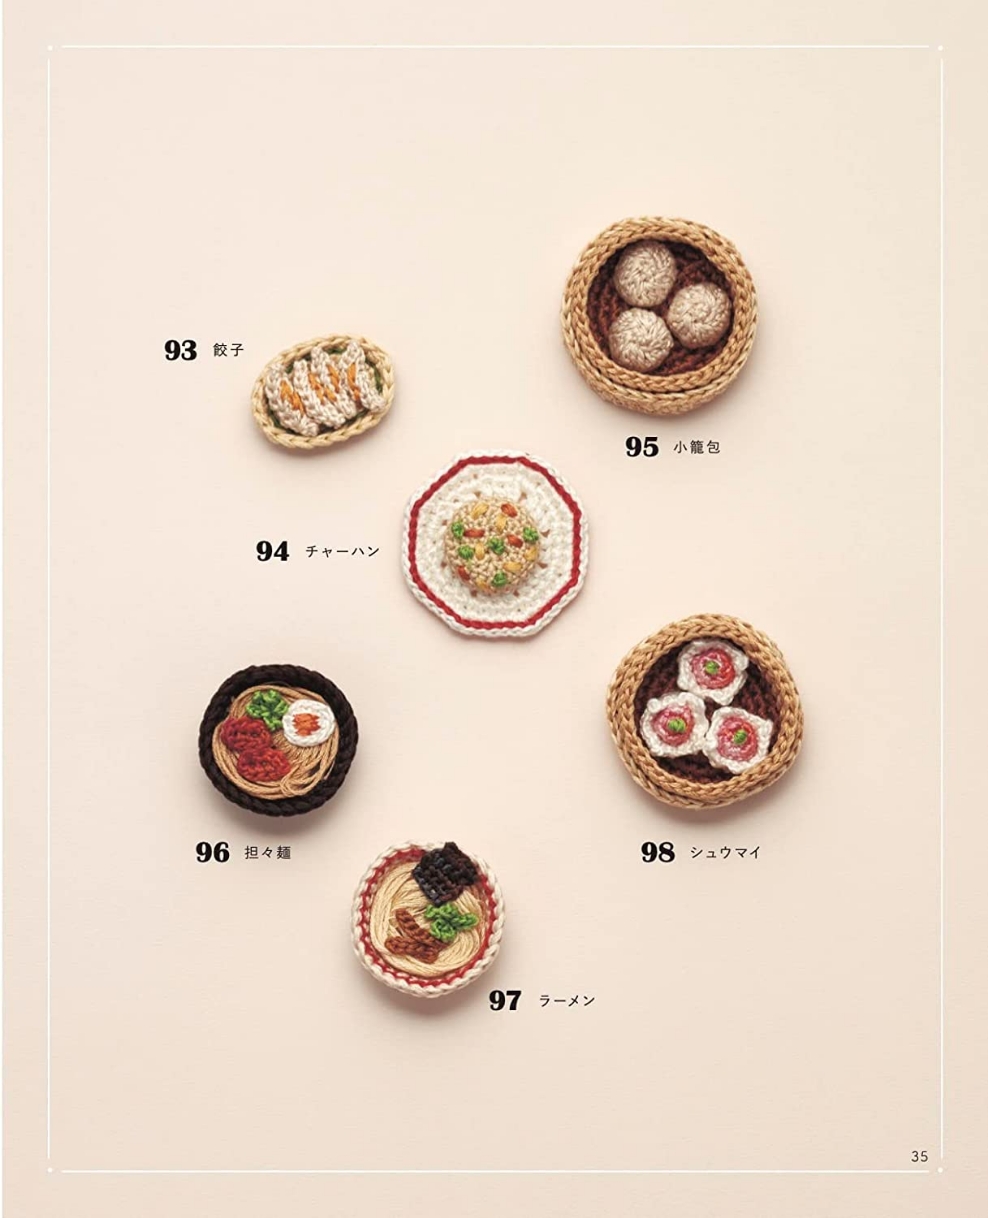 Complete collection of miniature food. knitting with crochet embroidery thread